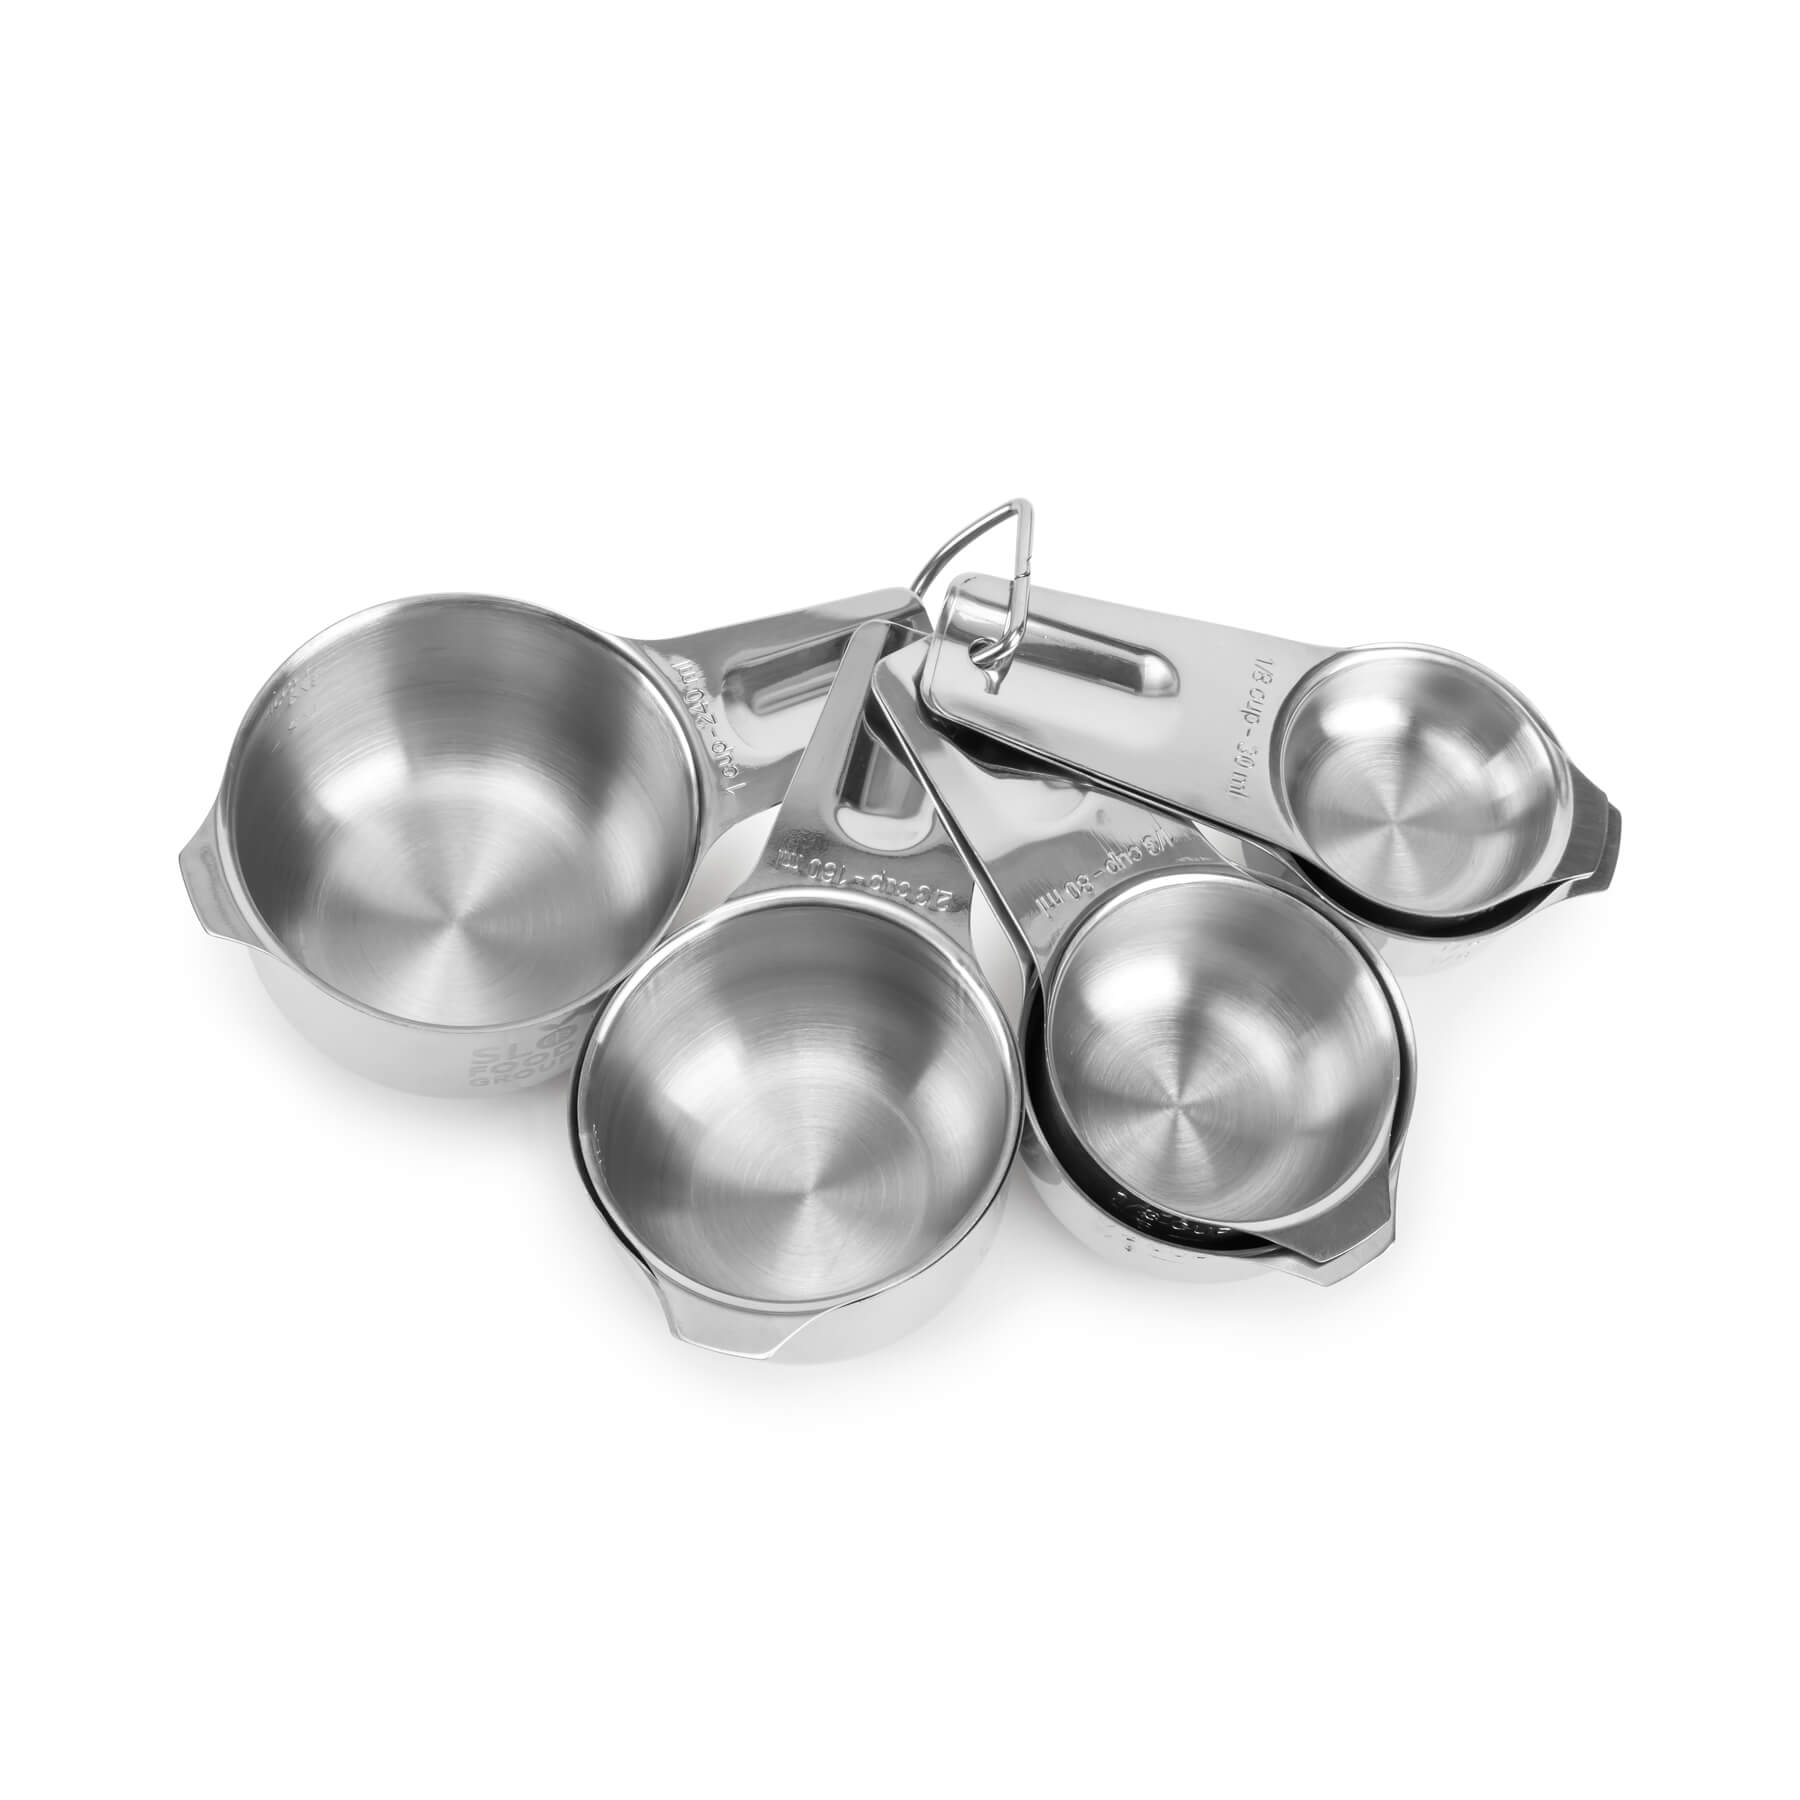 https://www.slofoodgroup.com/cdn/shop/products/measuring-cup-set-seven-piece-stainless-steel-measuring-cups-tools-slofoodgroup-884194.jpg?v=1631041063